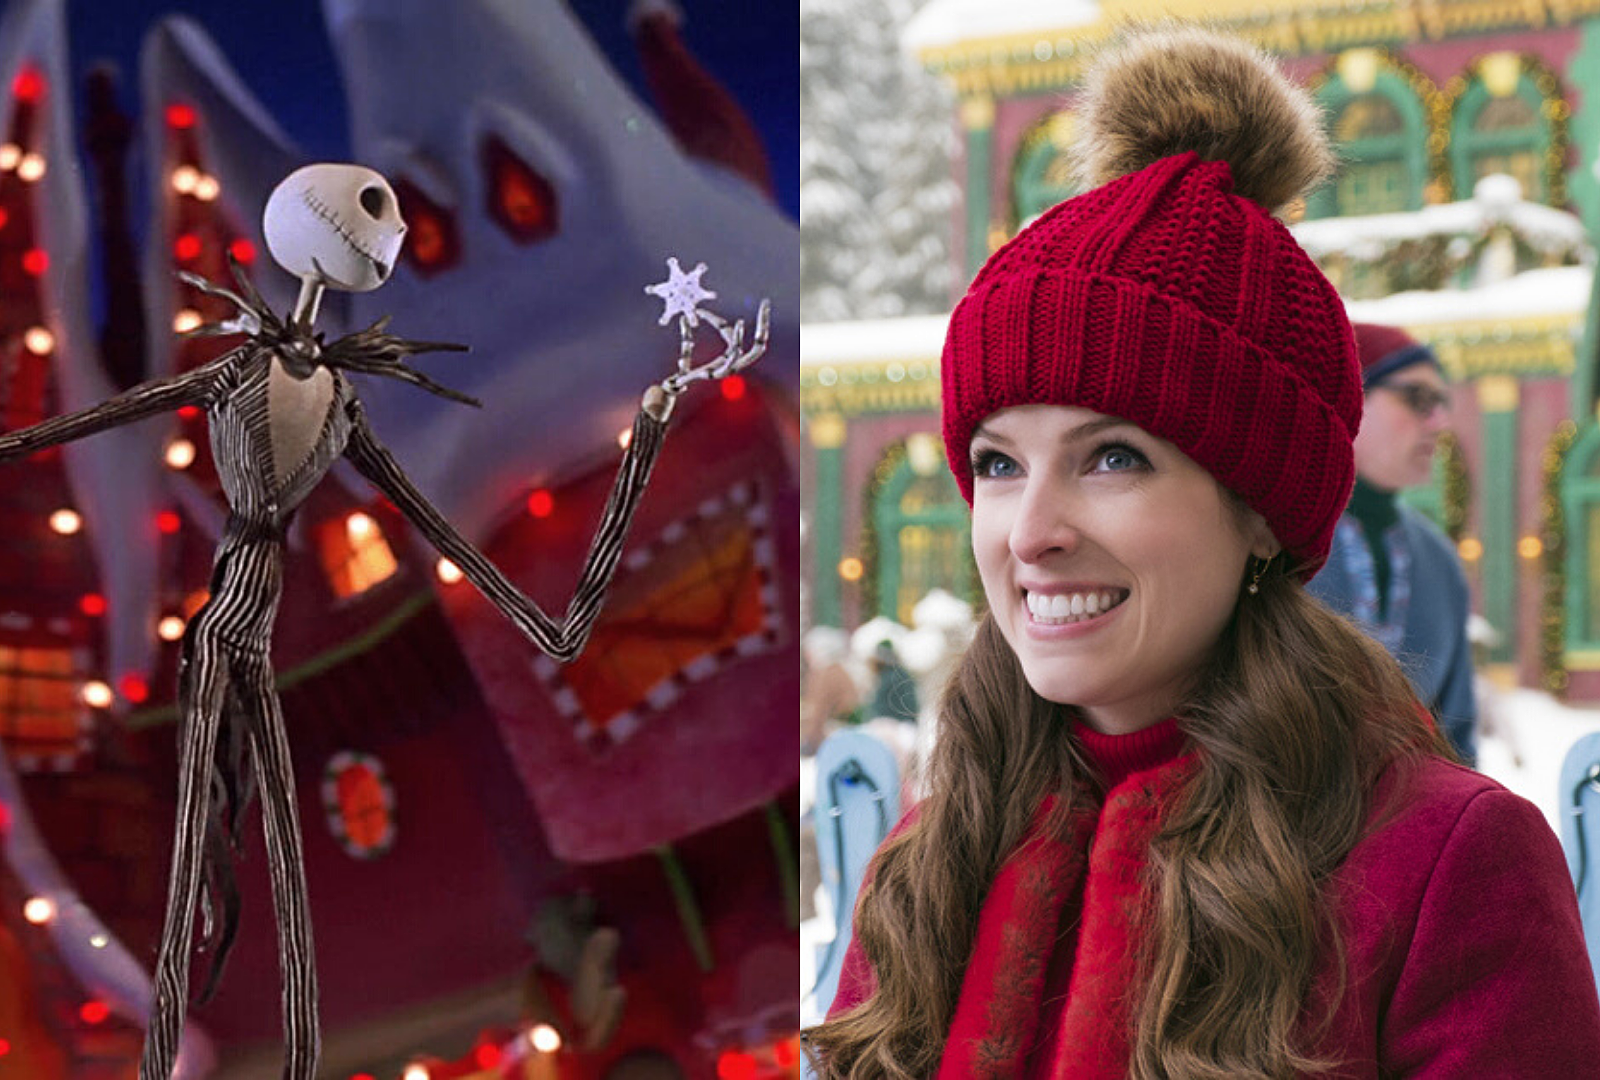 60 Best Christmas Movies to Stream on Netflix, Prime Video and